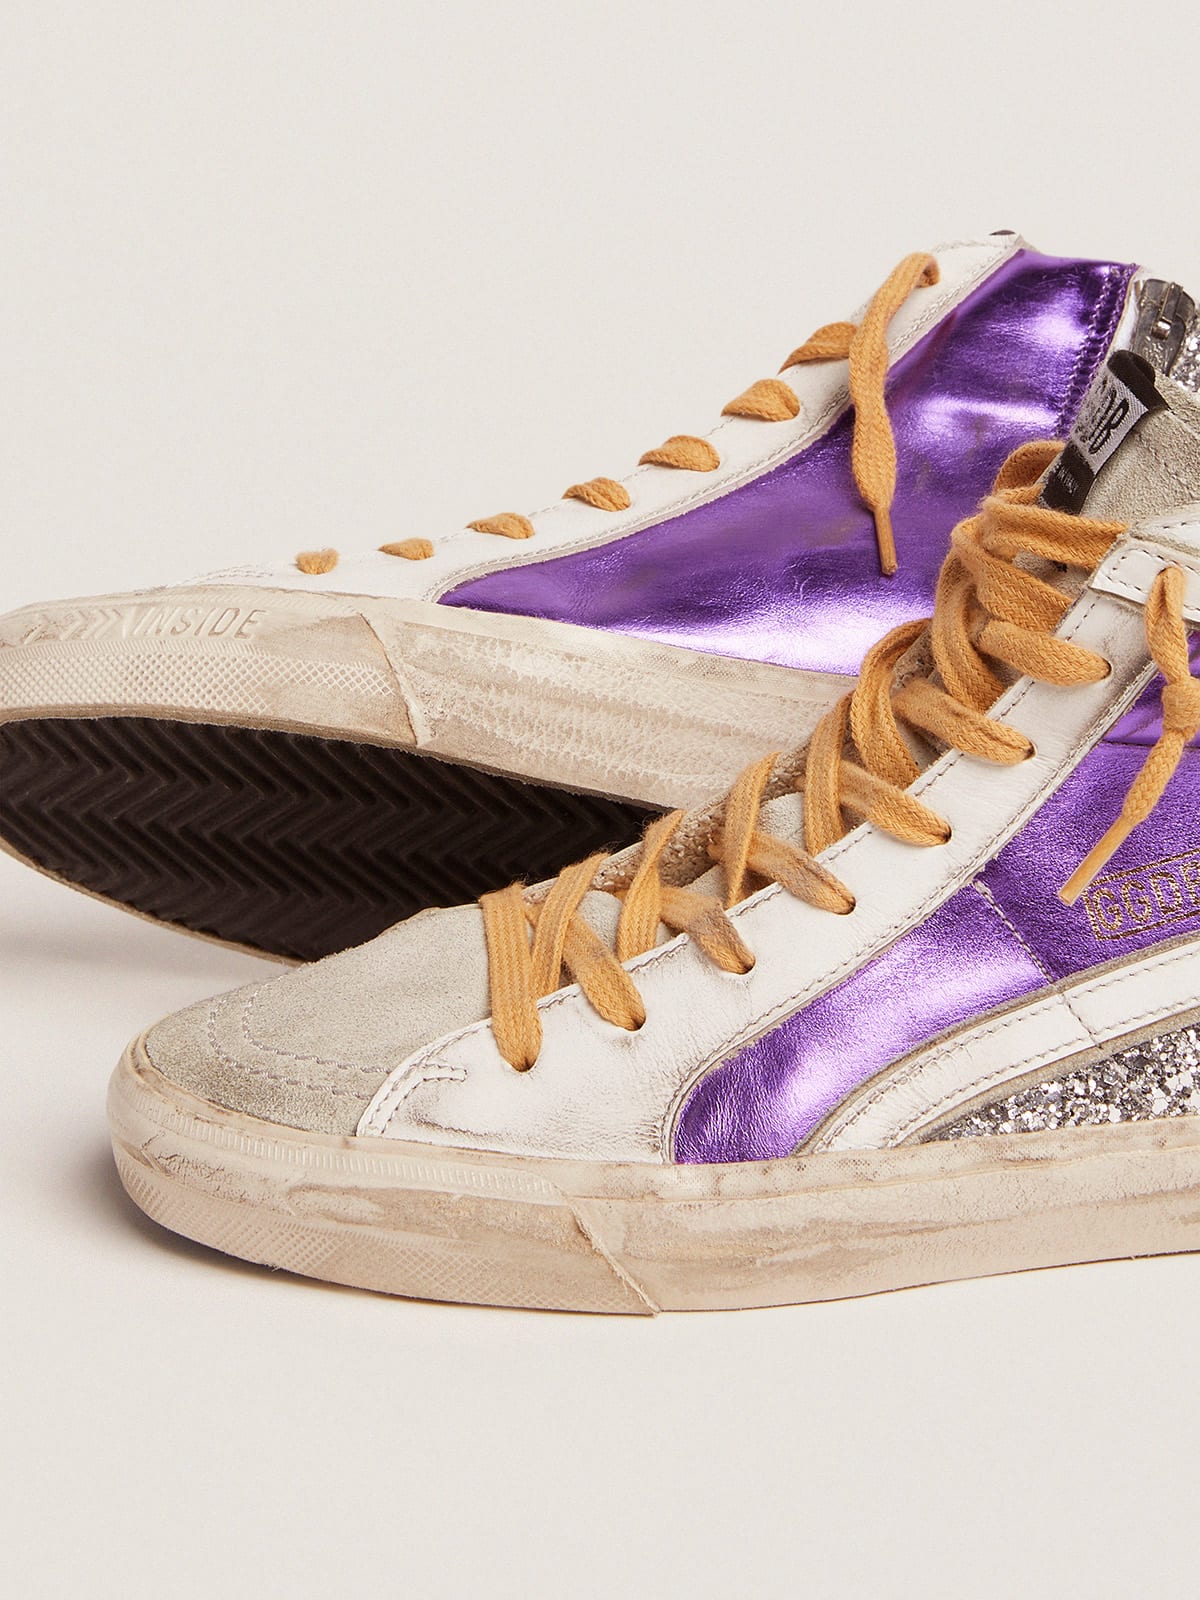 Slide sneakers with silver glitter and purple laminated leather upper |  Golden Goose